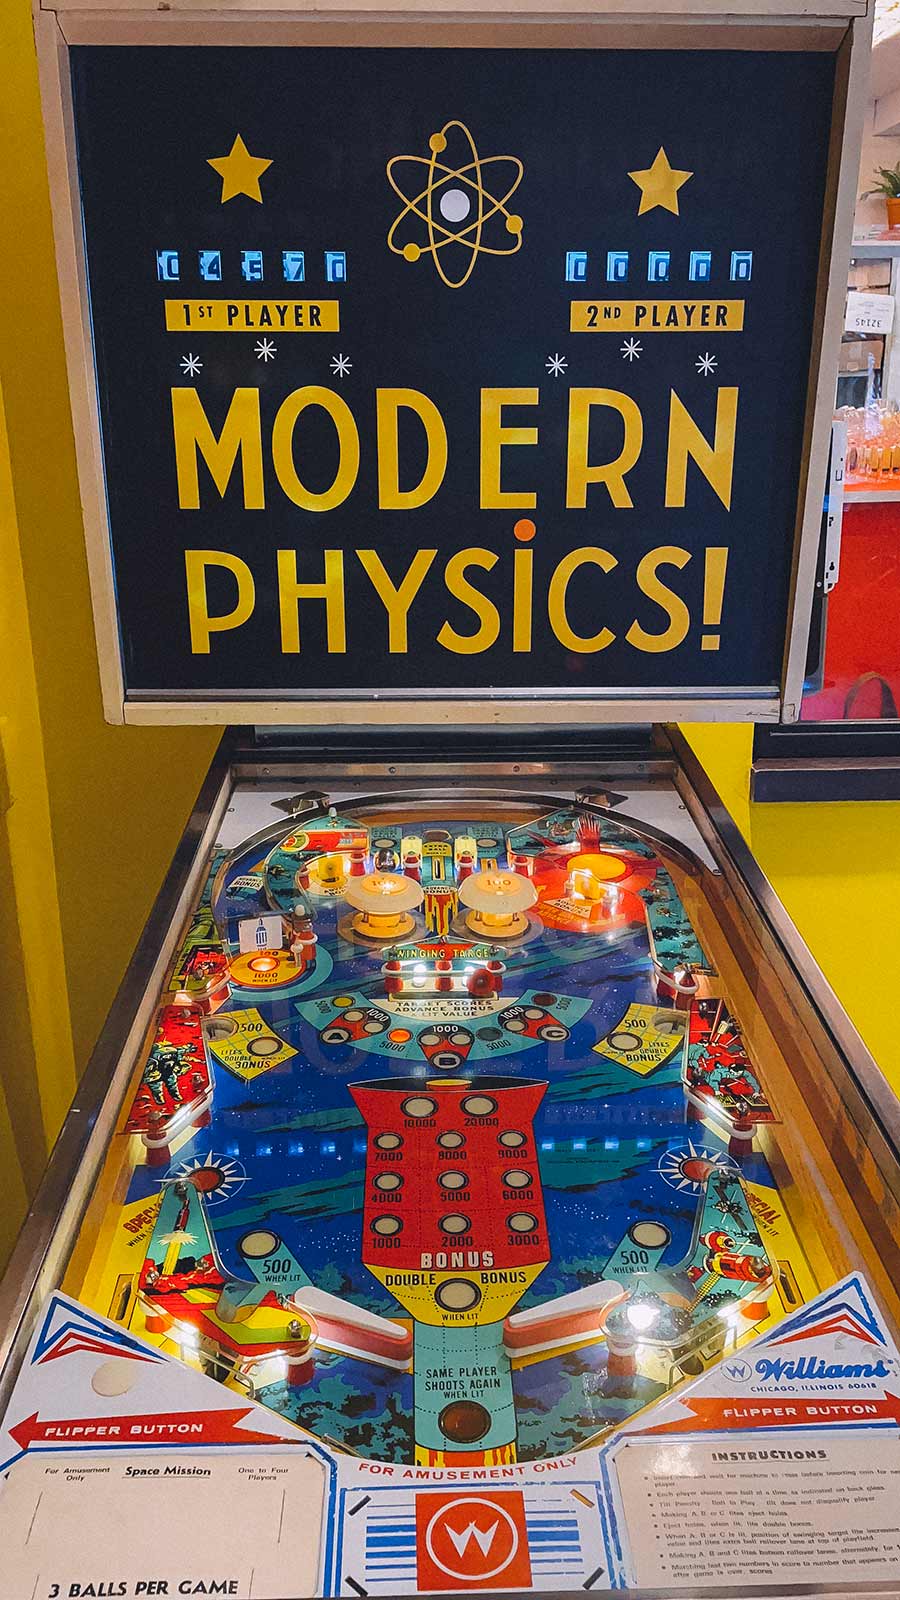 A vintage pinball machine called Modern Physics flashes different colors at Le Sans Blague, the The French Dispatch takeover of Whalebone on Bleecker